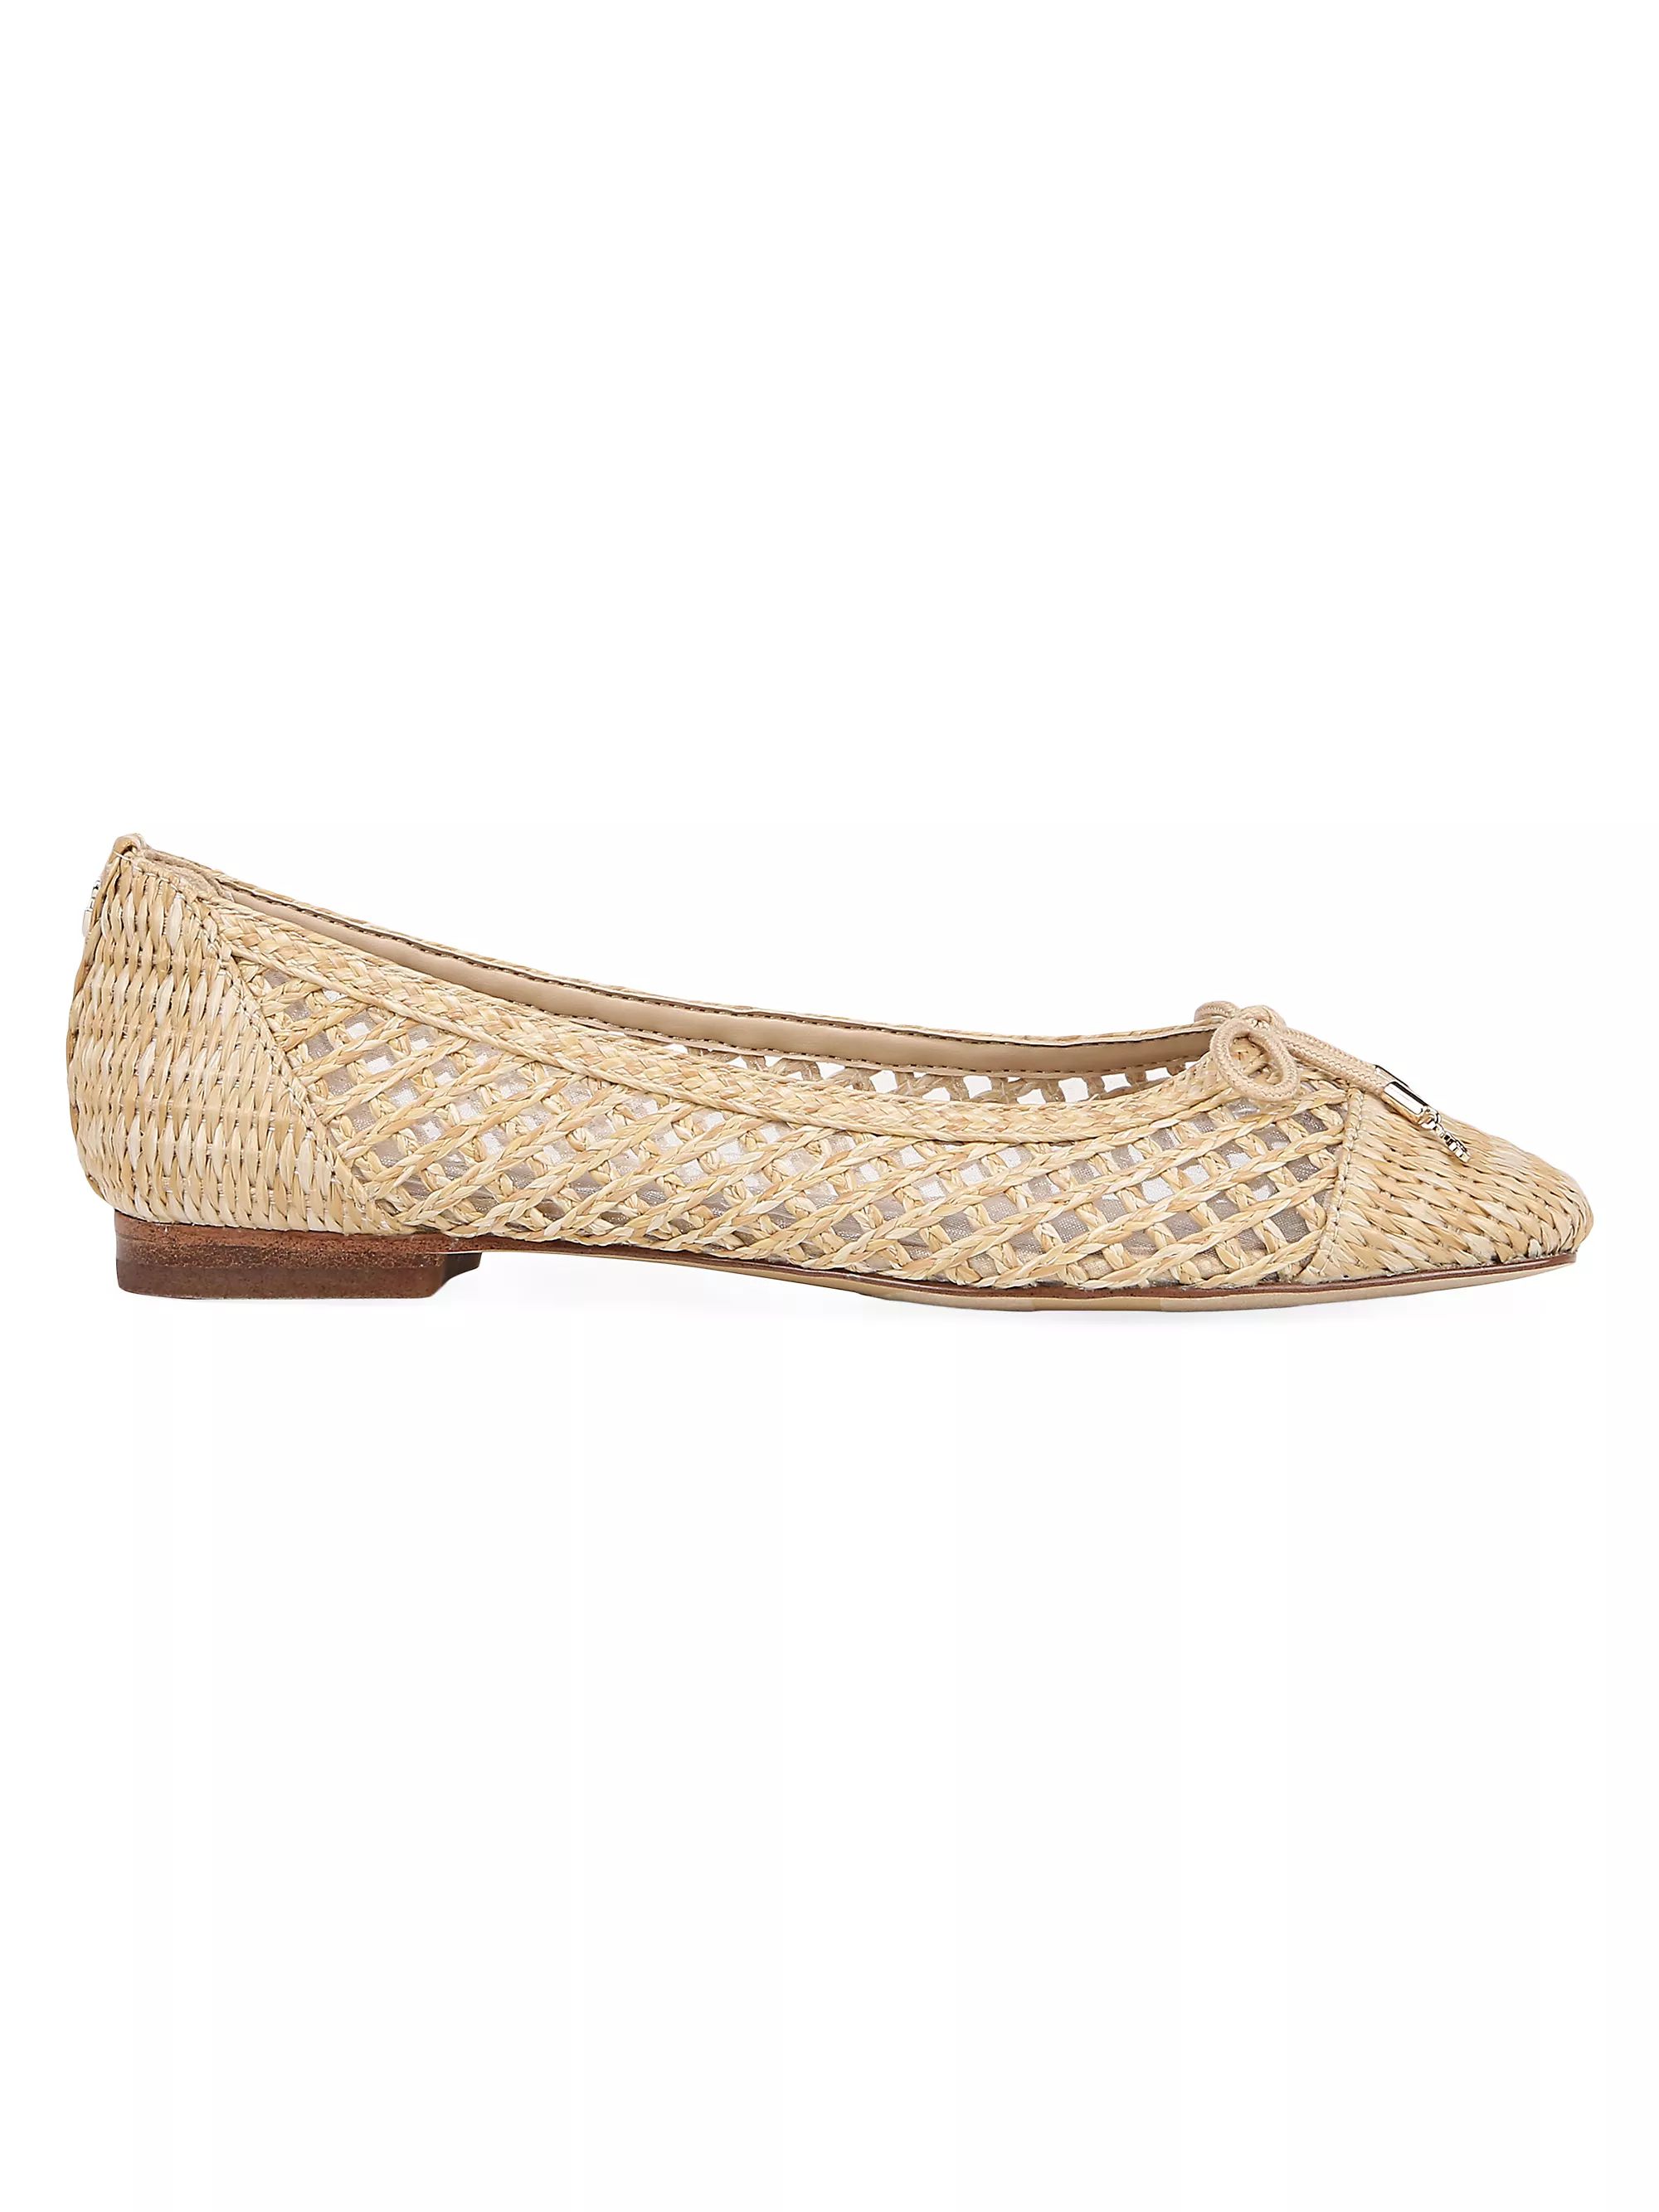 NaturalAll FlatsSam EdelmanMay Openweave Ballet Flats$140SELECT SIZE Free Shipping on $200+ Use ... | Saks Fifth Avenue